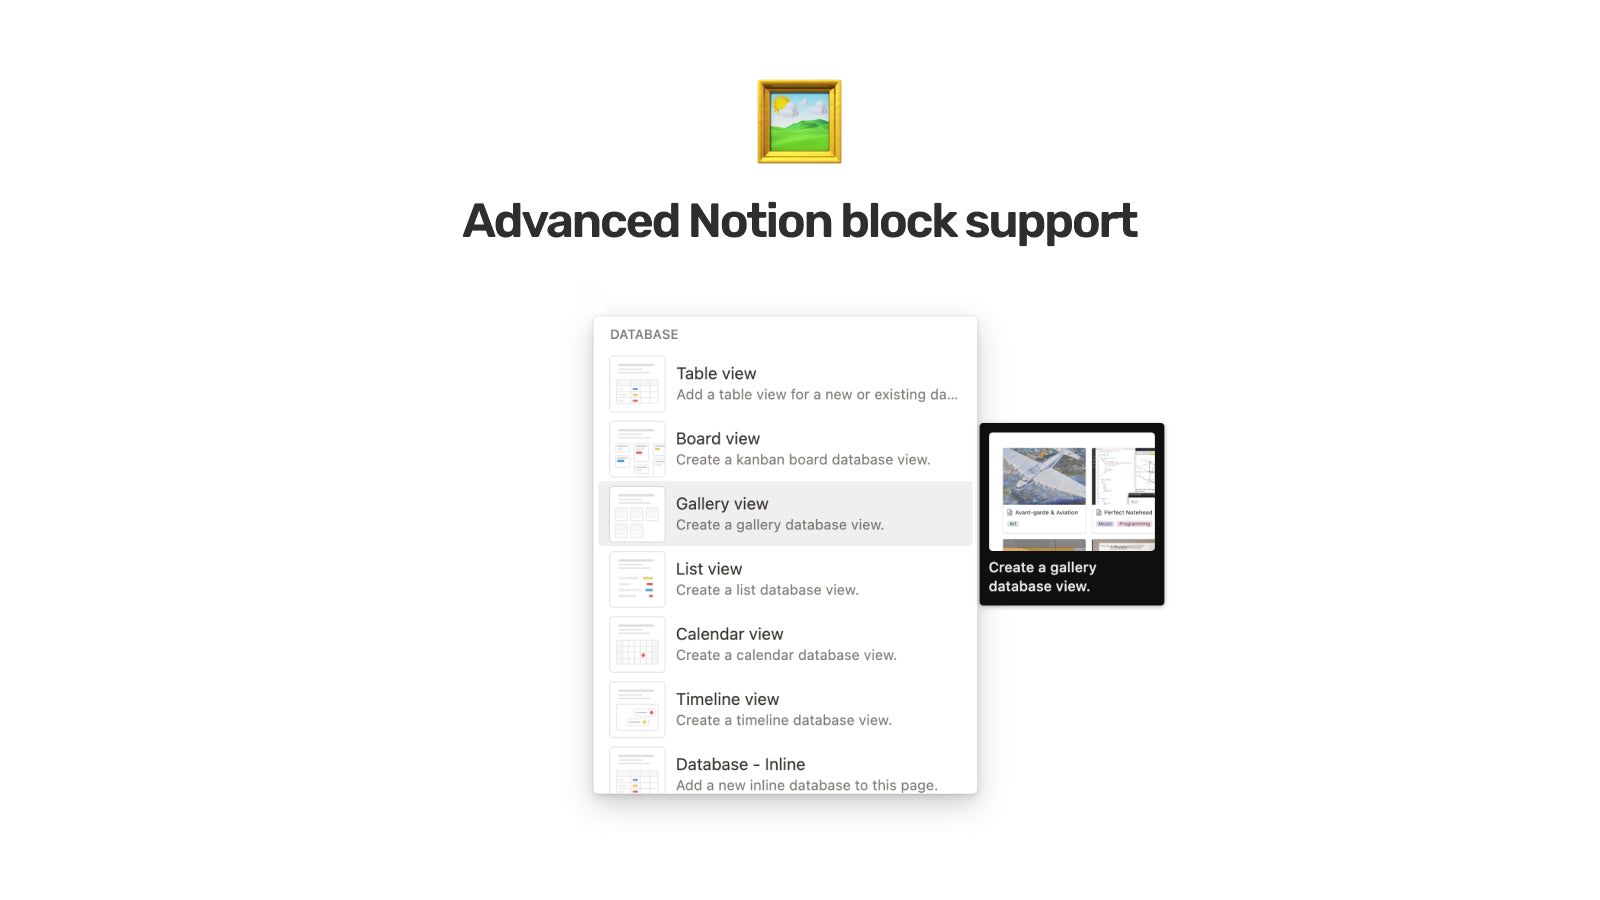 Advanced Notion block support